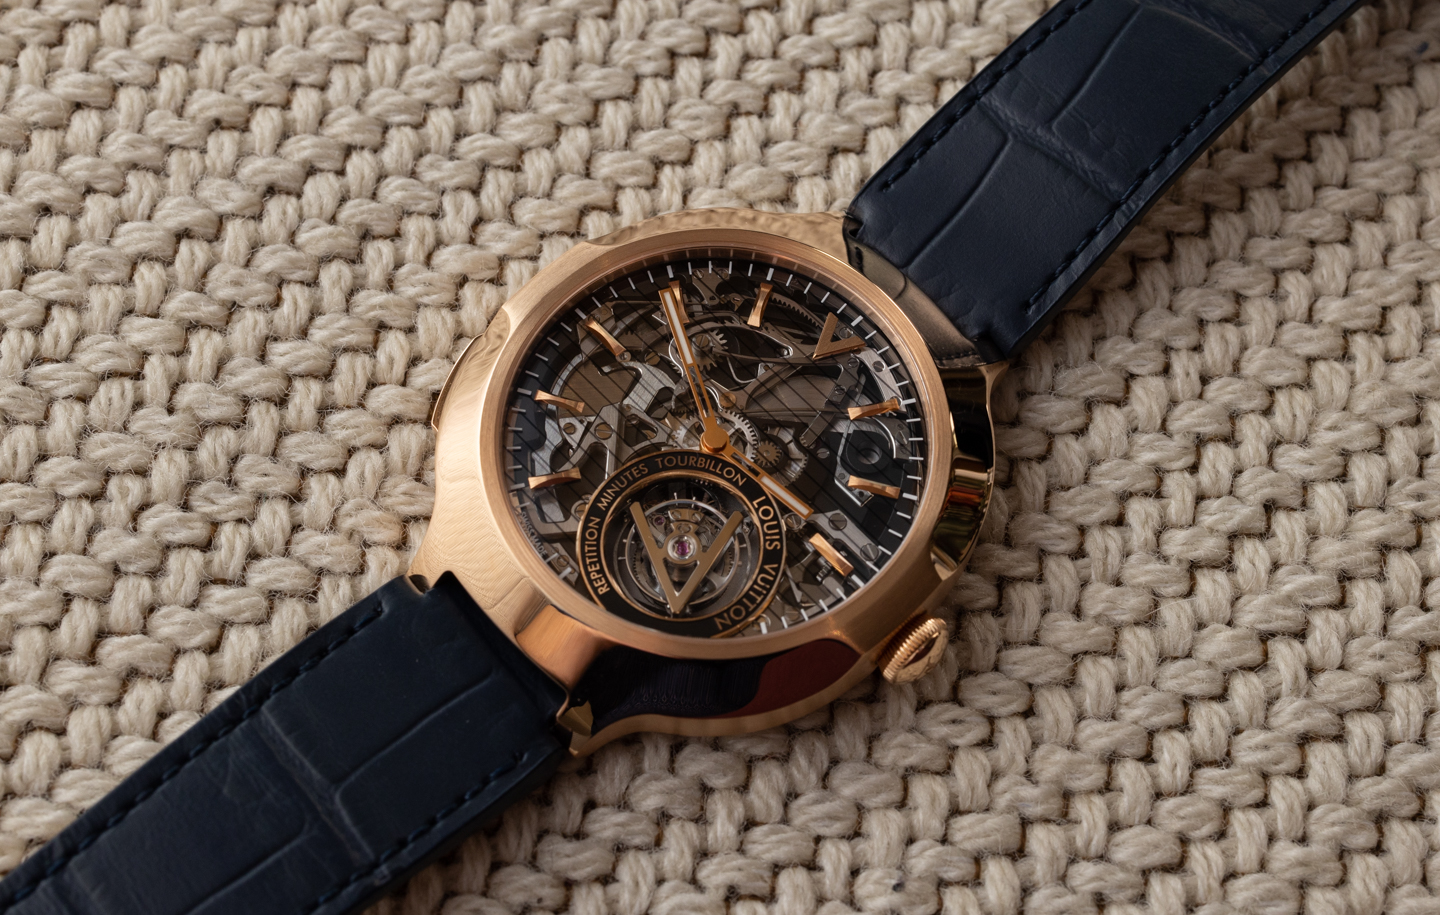 Louis Vuitton Voyager Minute Repeater Flying Tourbillon is